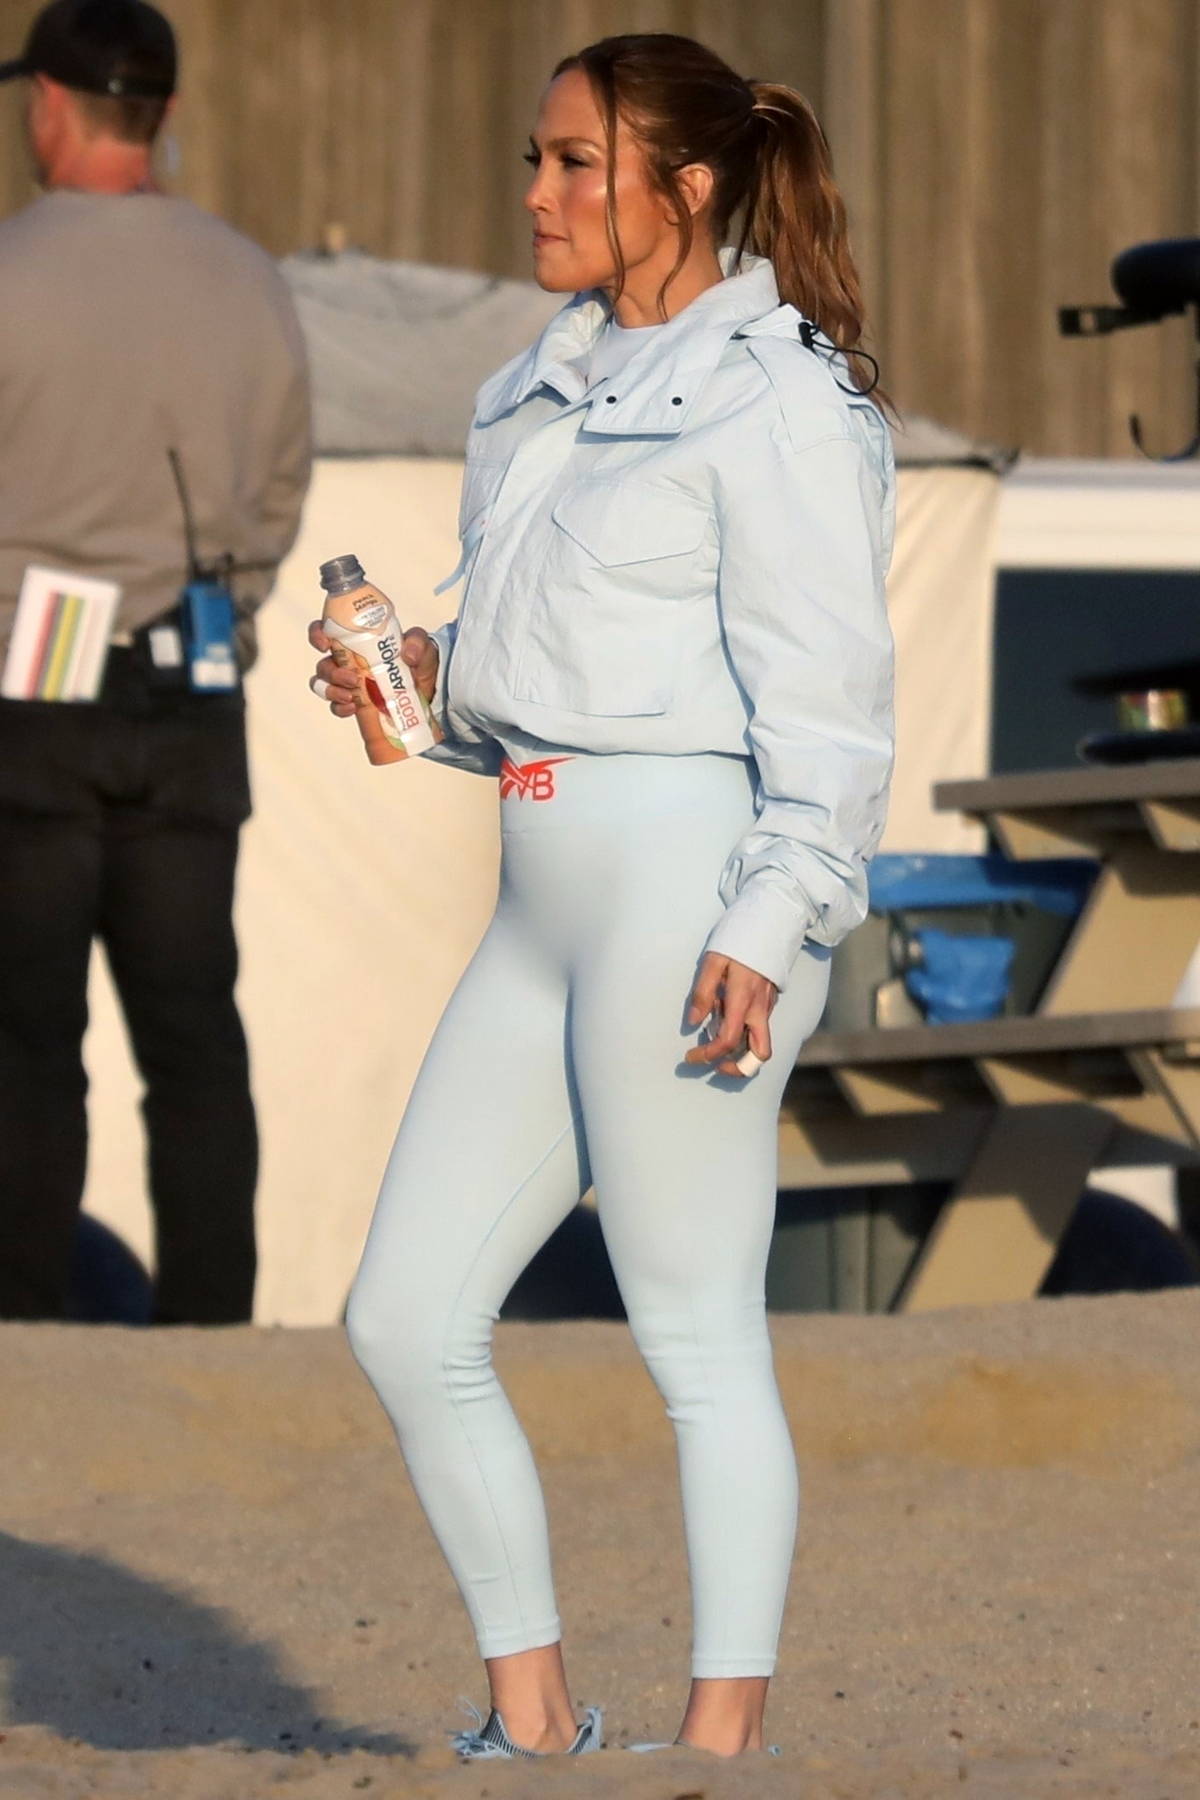 https://www.celebsfirst.com/wp-content/uploads/2022/12/jennifer-lopez-shows-off-her-famous-curves-in-baby-blue-leggings-during-a-beach-photoshoot-in-malibu-california-301122_11.jpg